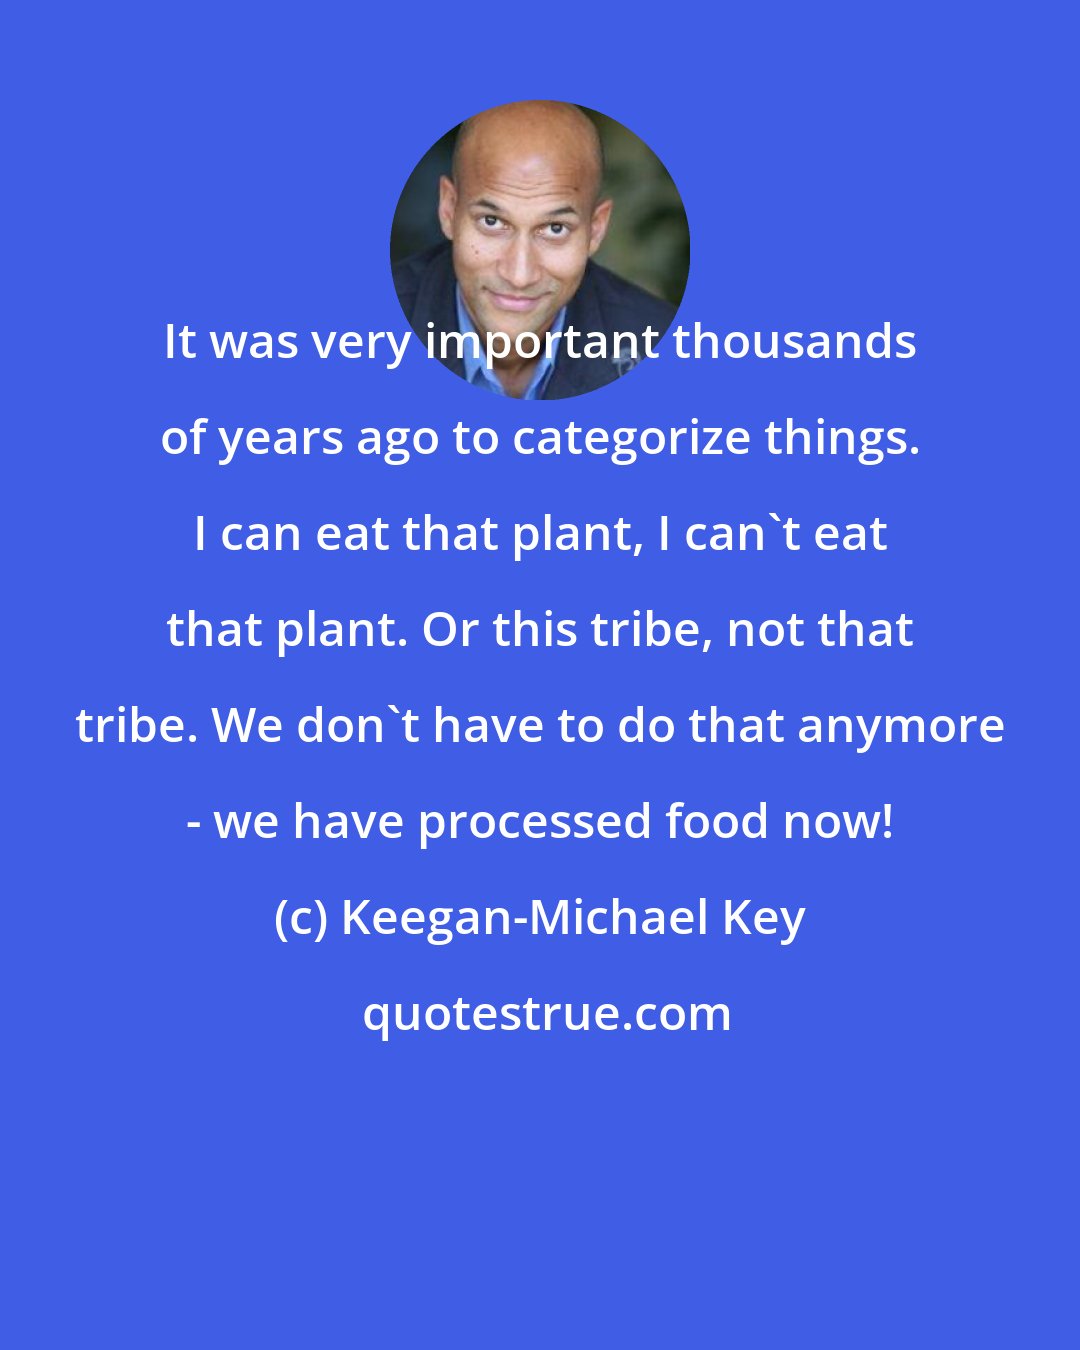 Keegan-Michael Key: It was very important thousands of years ago to categorize things. I can eat that plant, I can't eat that plant. Or this tribe, not that tribe. We don't have to do that anymore - we have processed food now!